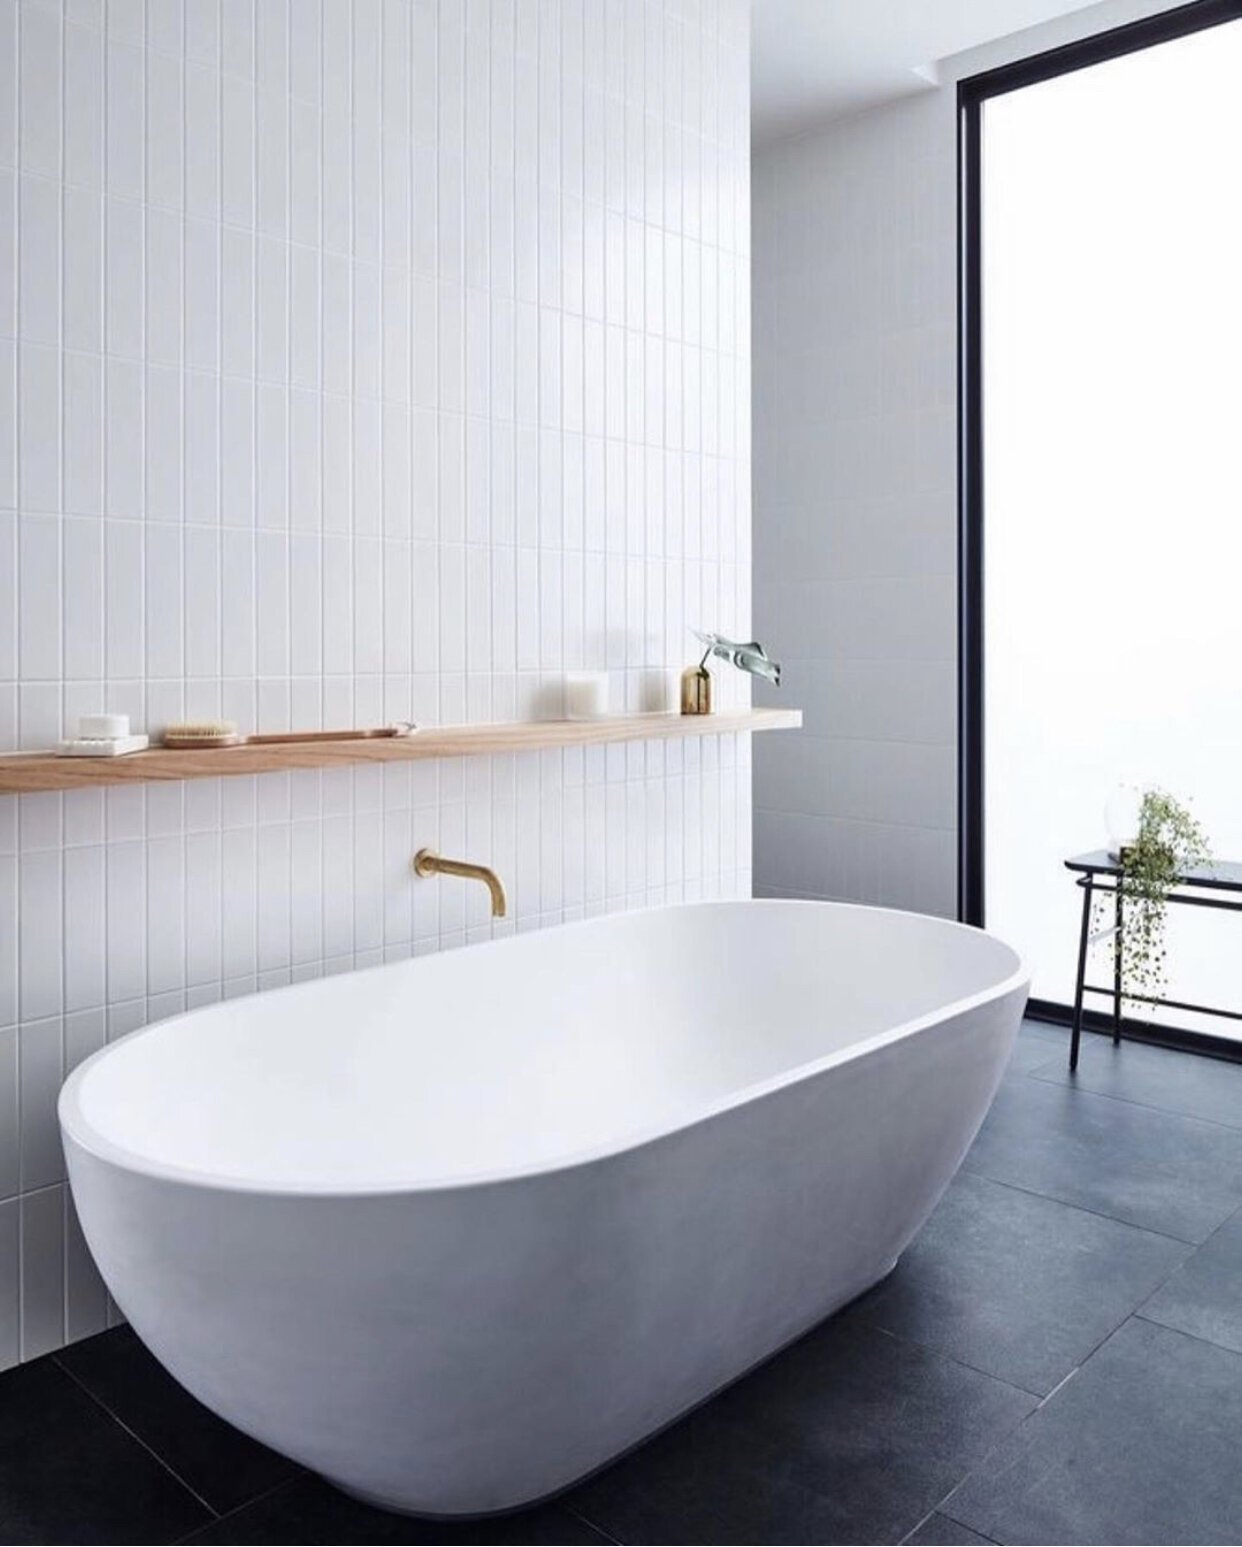 Stacked tile in a vertically stacked tiling pattern in a modern bathroom with gray floor tiles and a white freestanding bath and wooden bath shelf